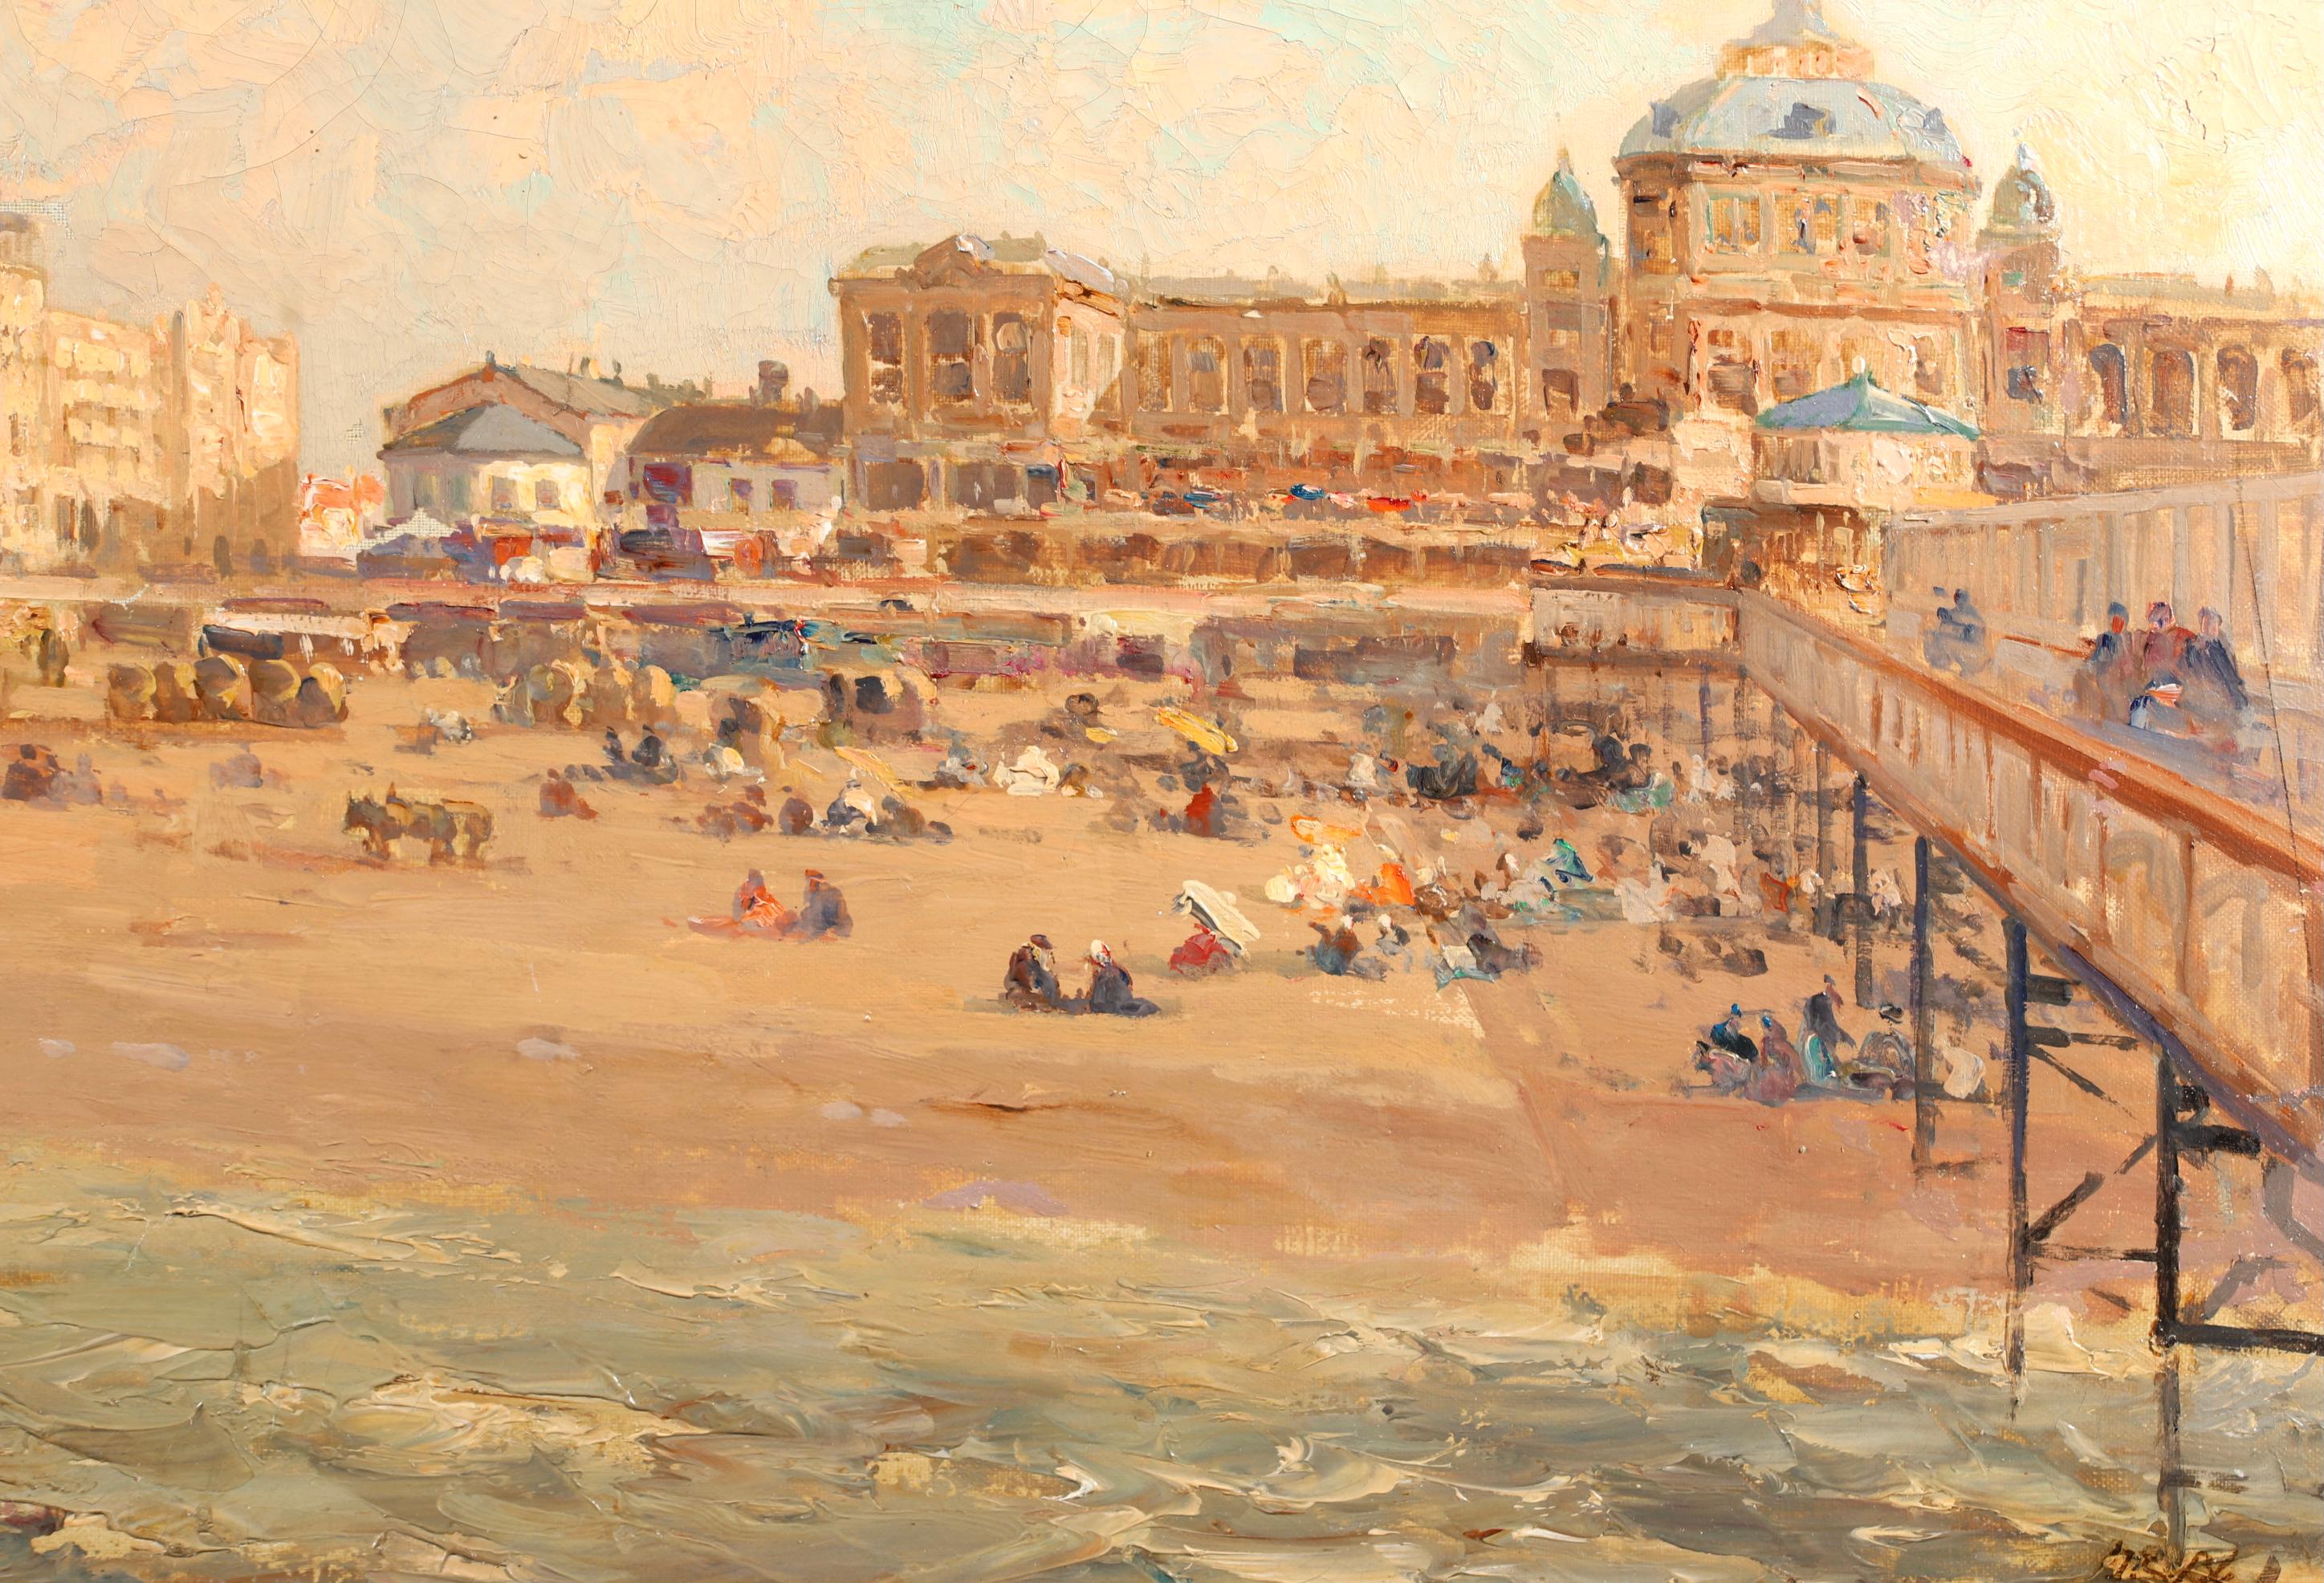 Signed post impressionist oil on canvas landscape  by French painter Jacques-Emile Blanche. The work depicts crowds of people enjoying a day at Brighton beach on the south coast of England. Bathers are dotted across the sandy beach with the pier on